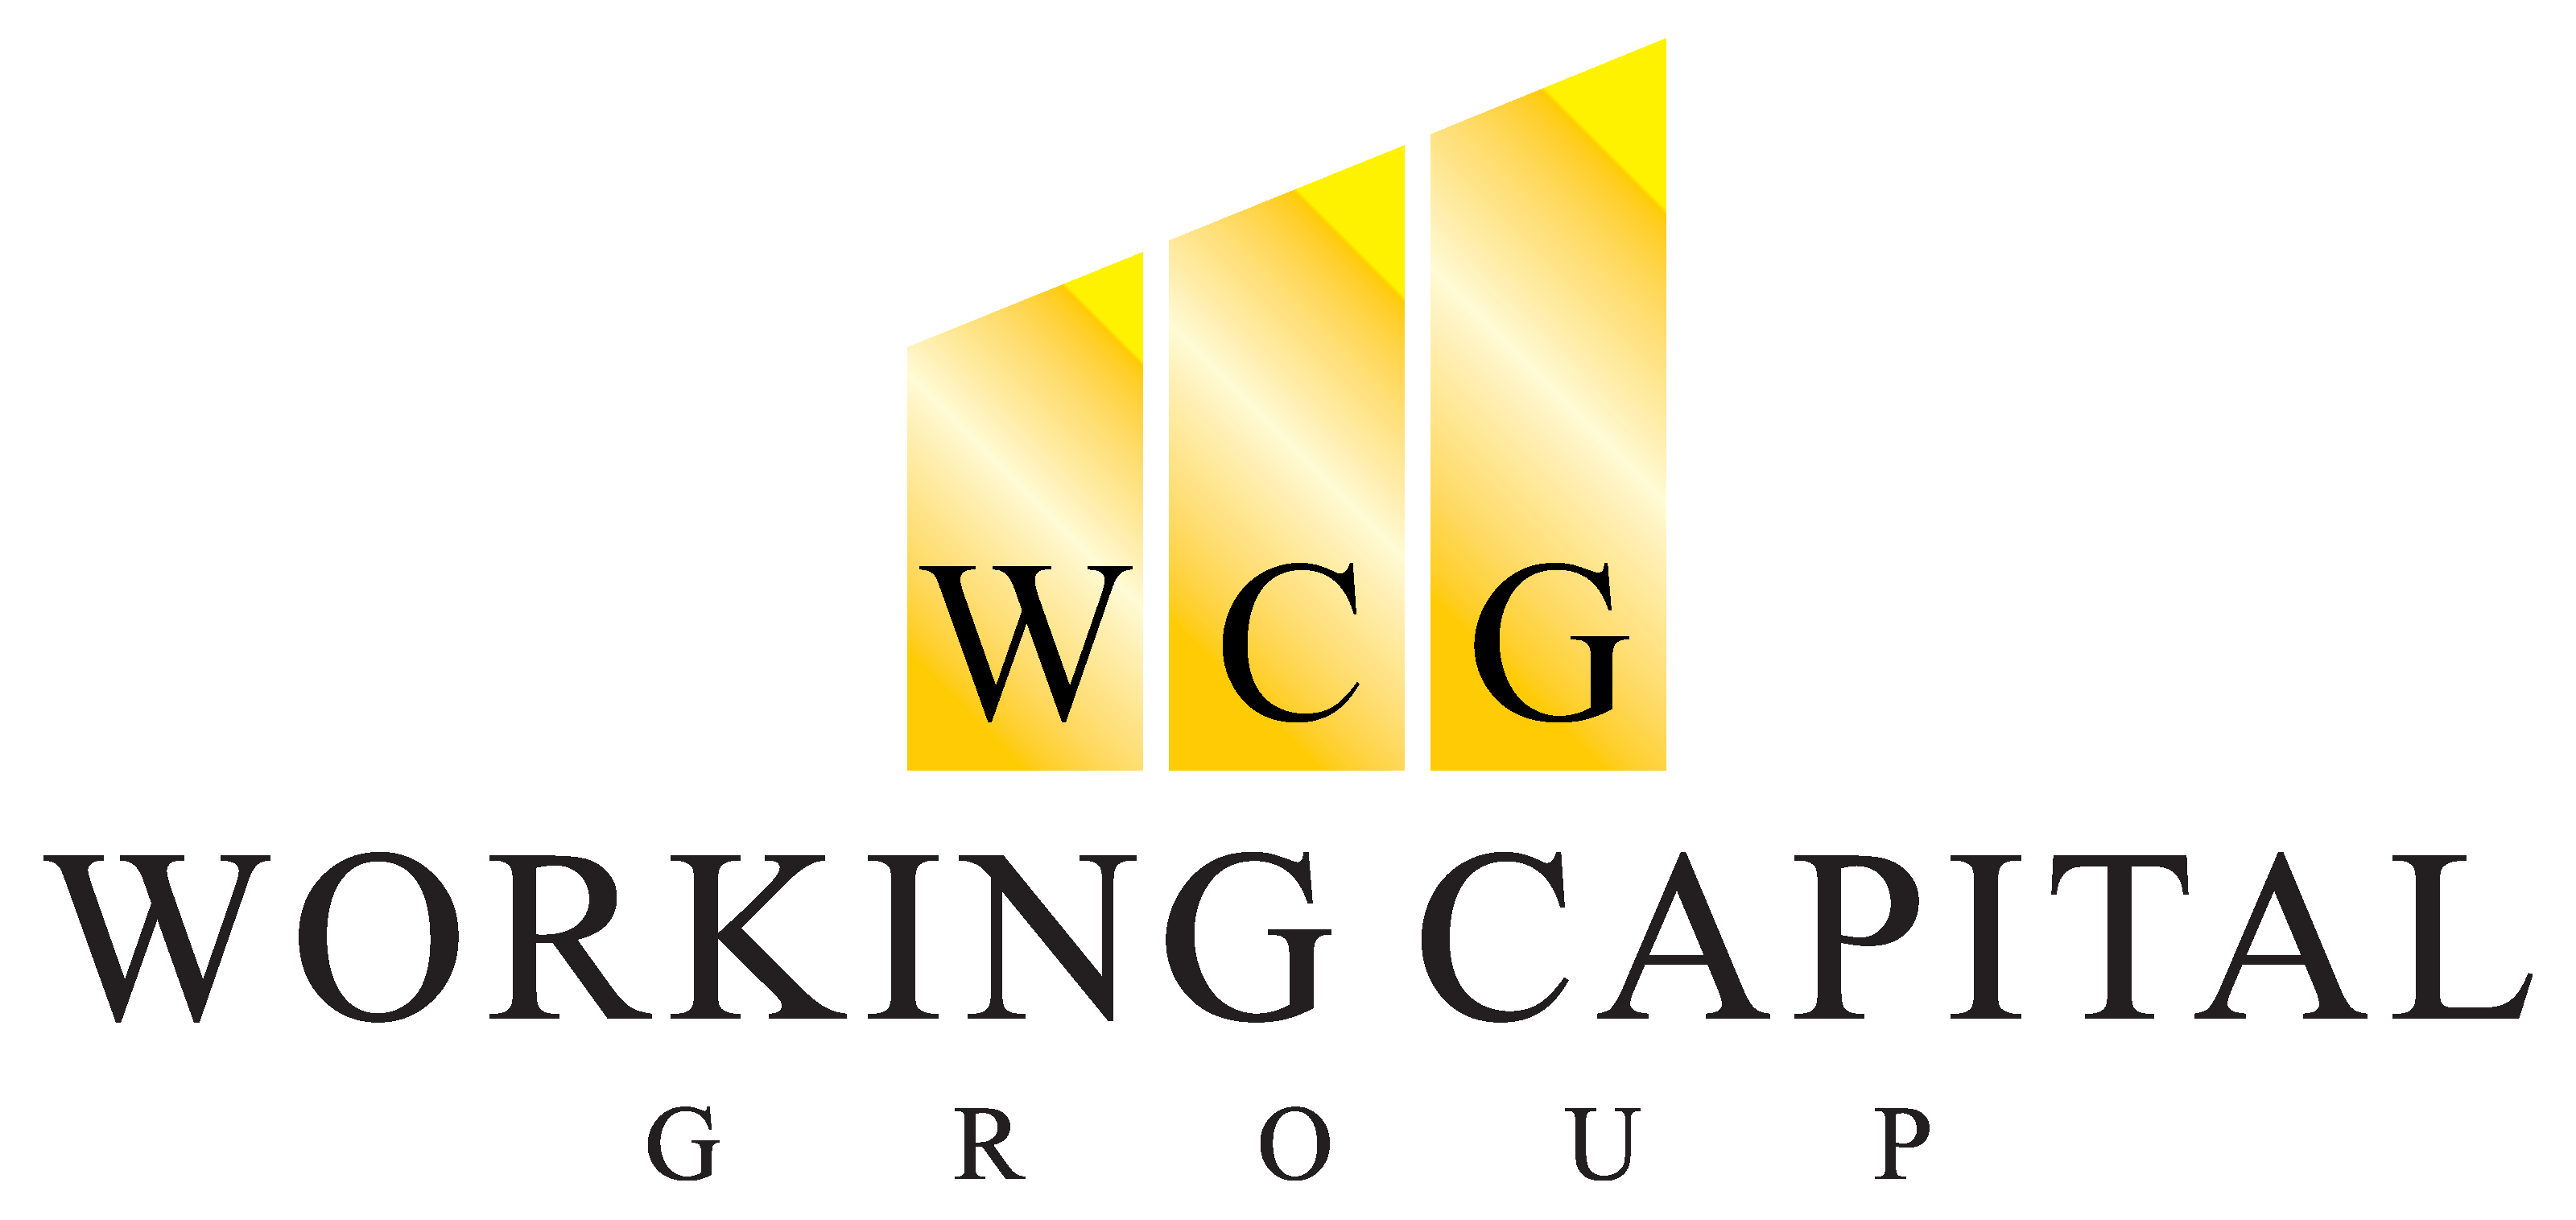 Working Capital Group